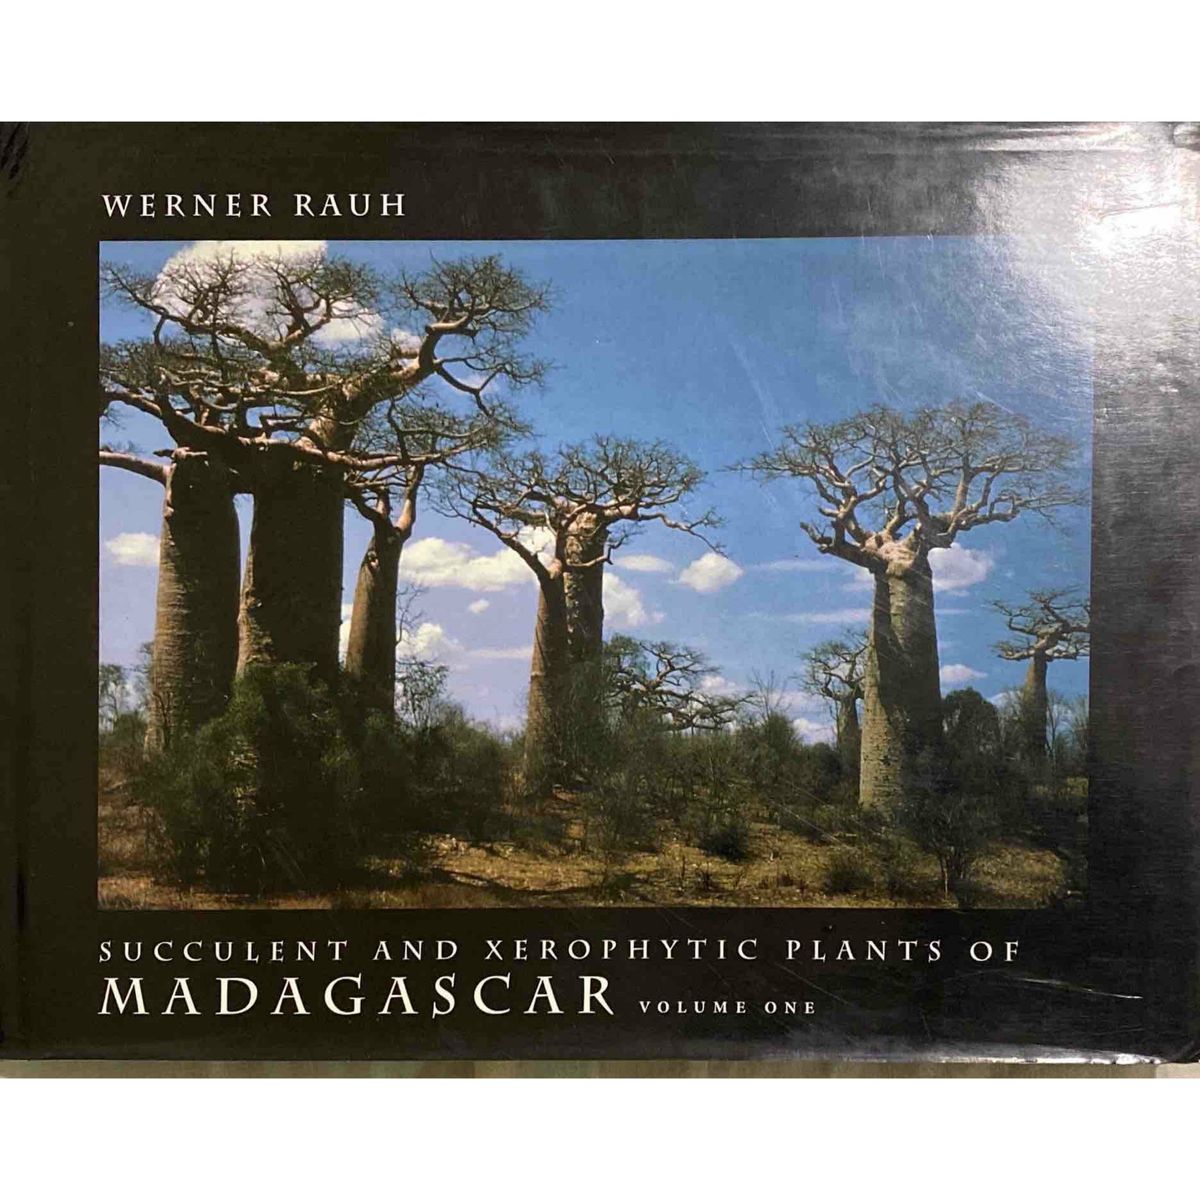 ISBN: 9780912647142 / 0912647140 - Succulent and Xerophytic Plants of Madagascar: Volume One by Werner Rauh [1995]